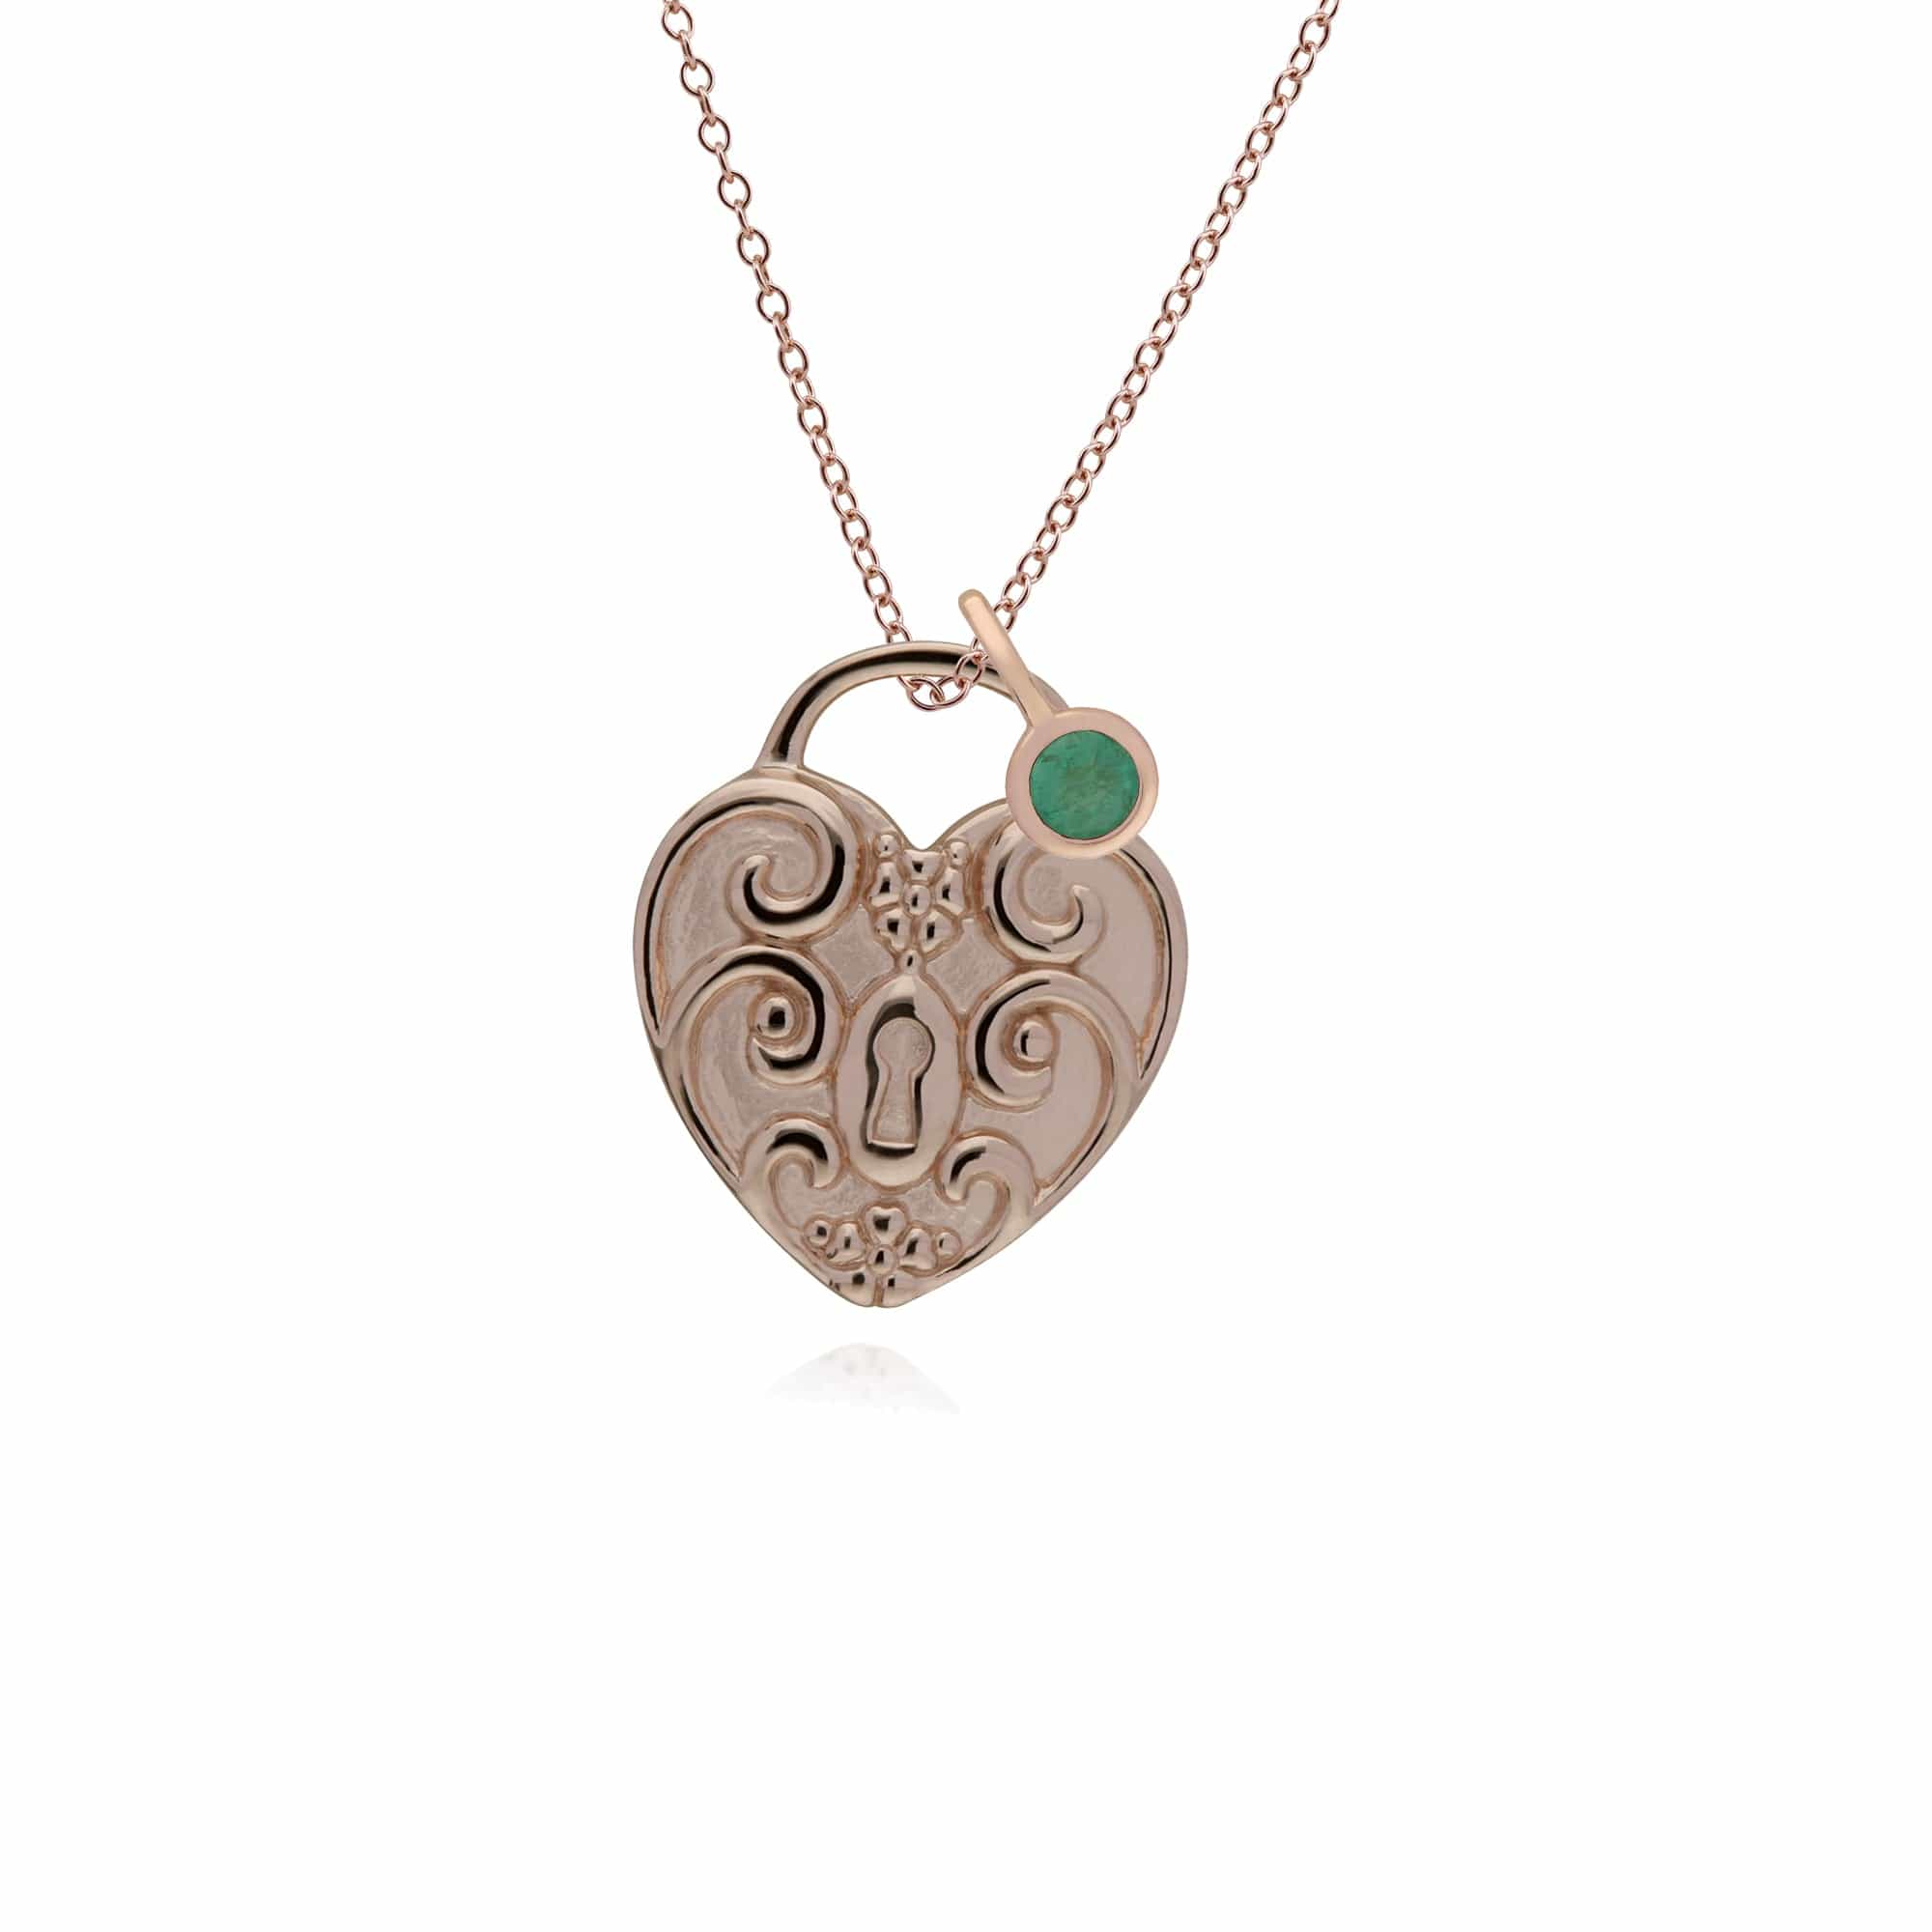 270P027302925-270P026501925 Classic Swirl Heart Lock Pendant & Emerald Charm in Rose Gold Plated 925 Sterling Silver 1